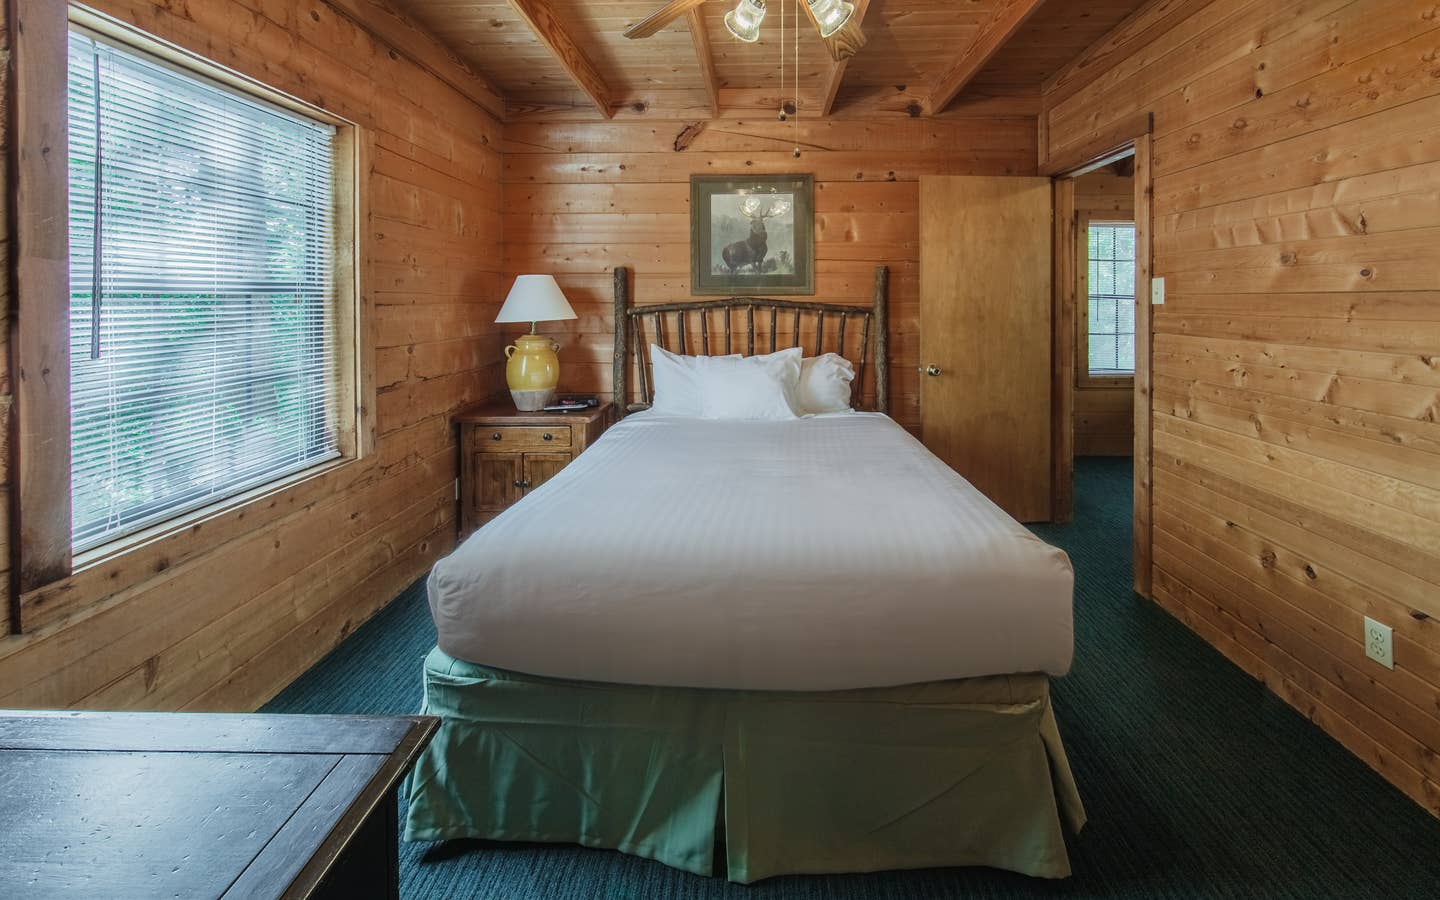 Bedroom in a one-bedroom log cabin at Holly Lake Resort in Holly Lake Ranch, Texas.